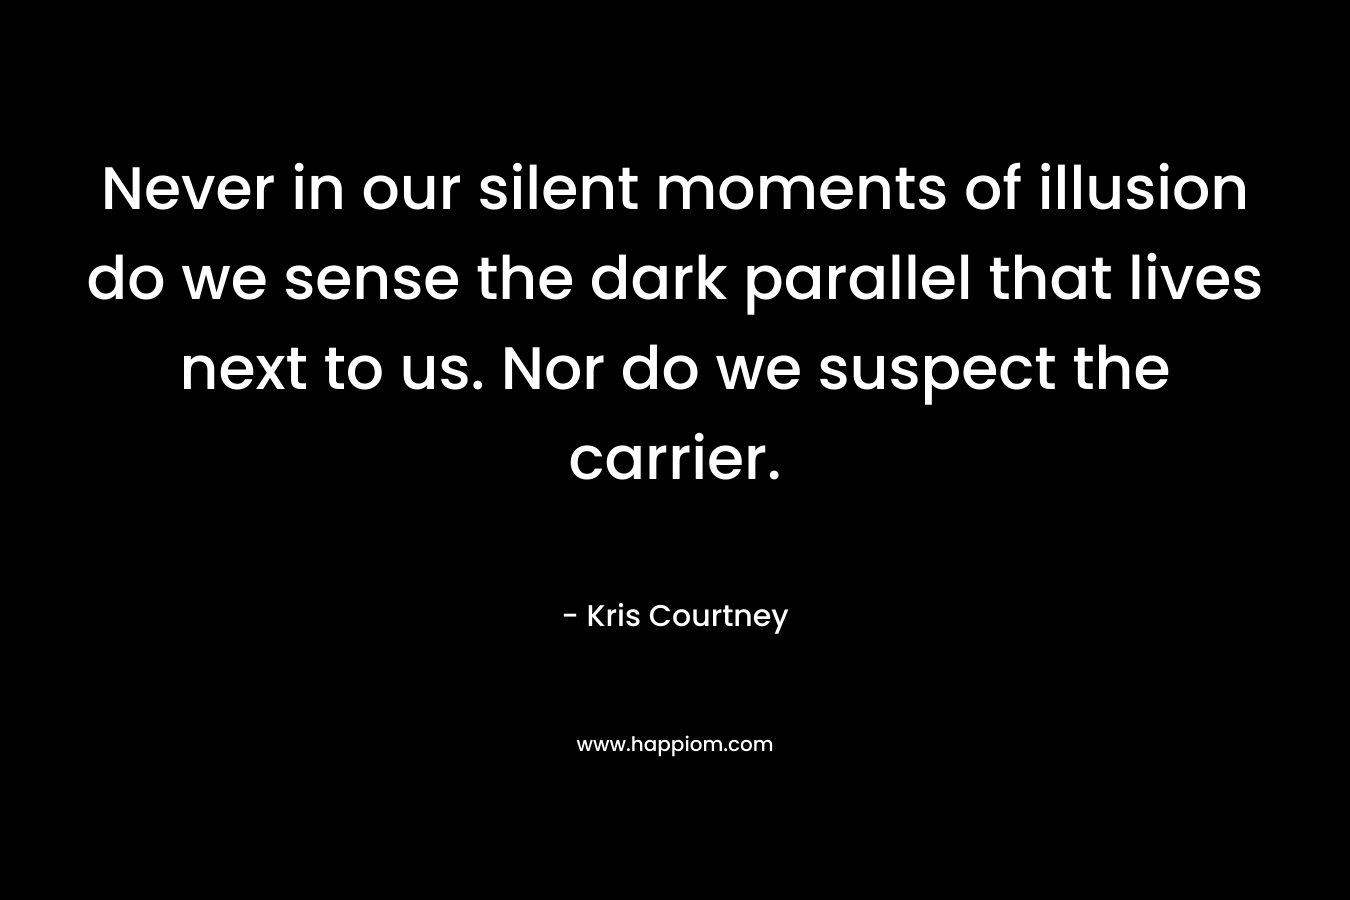 Never in our silent moments of illusion do we sense the dark parallel that lives next to us. Nor do we suspect the carrier. – Kris Courtney